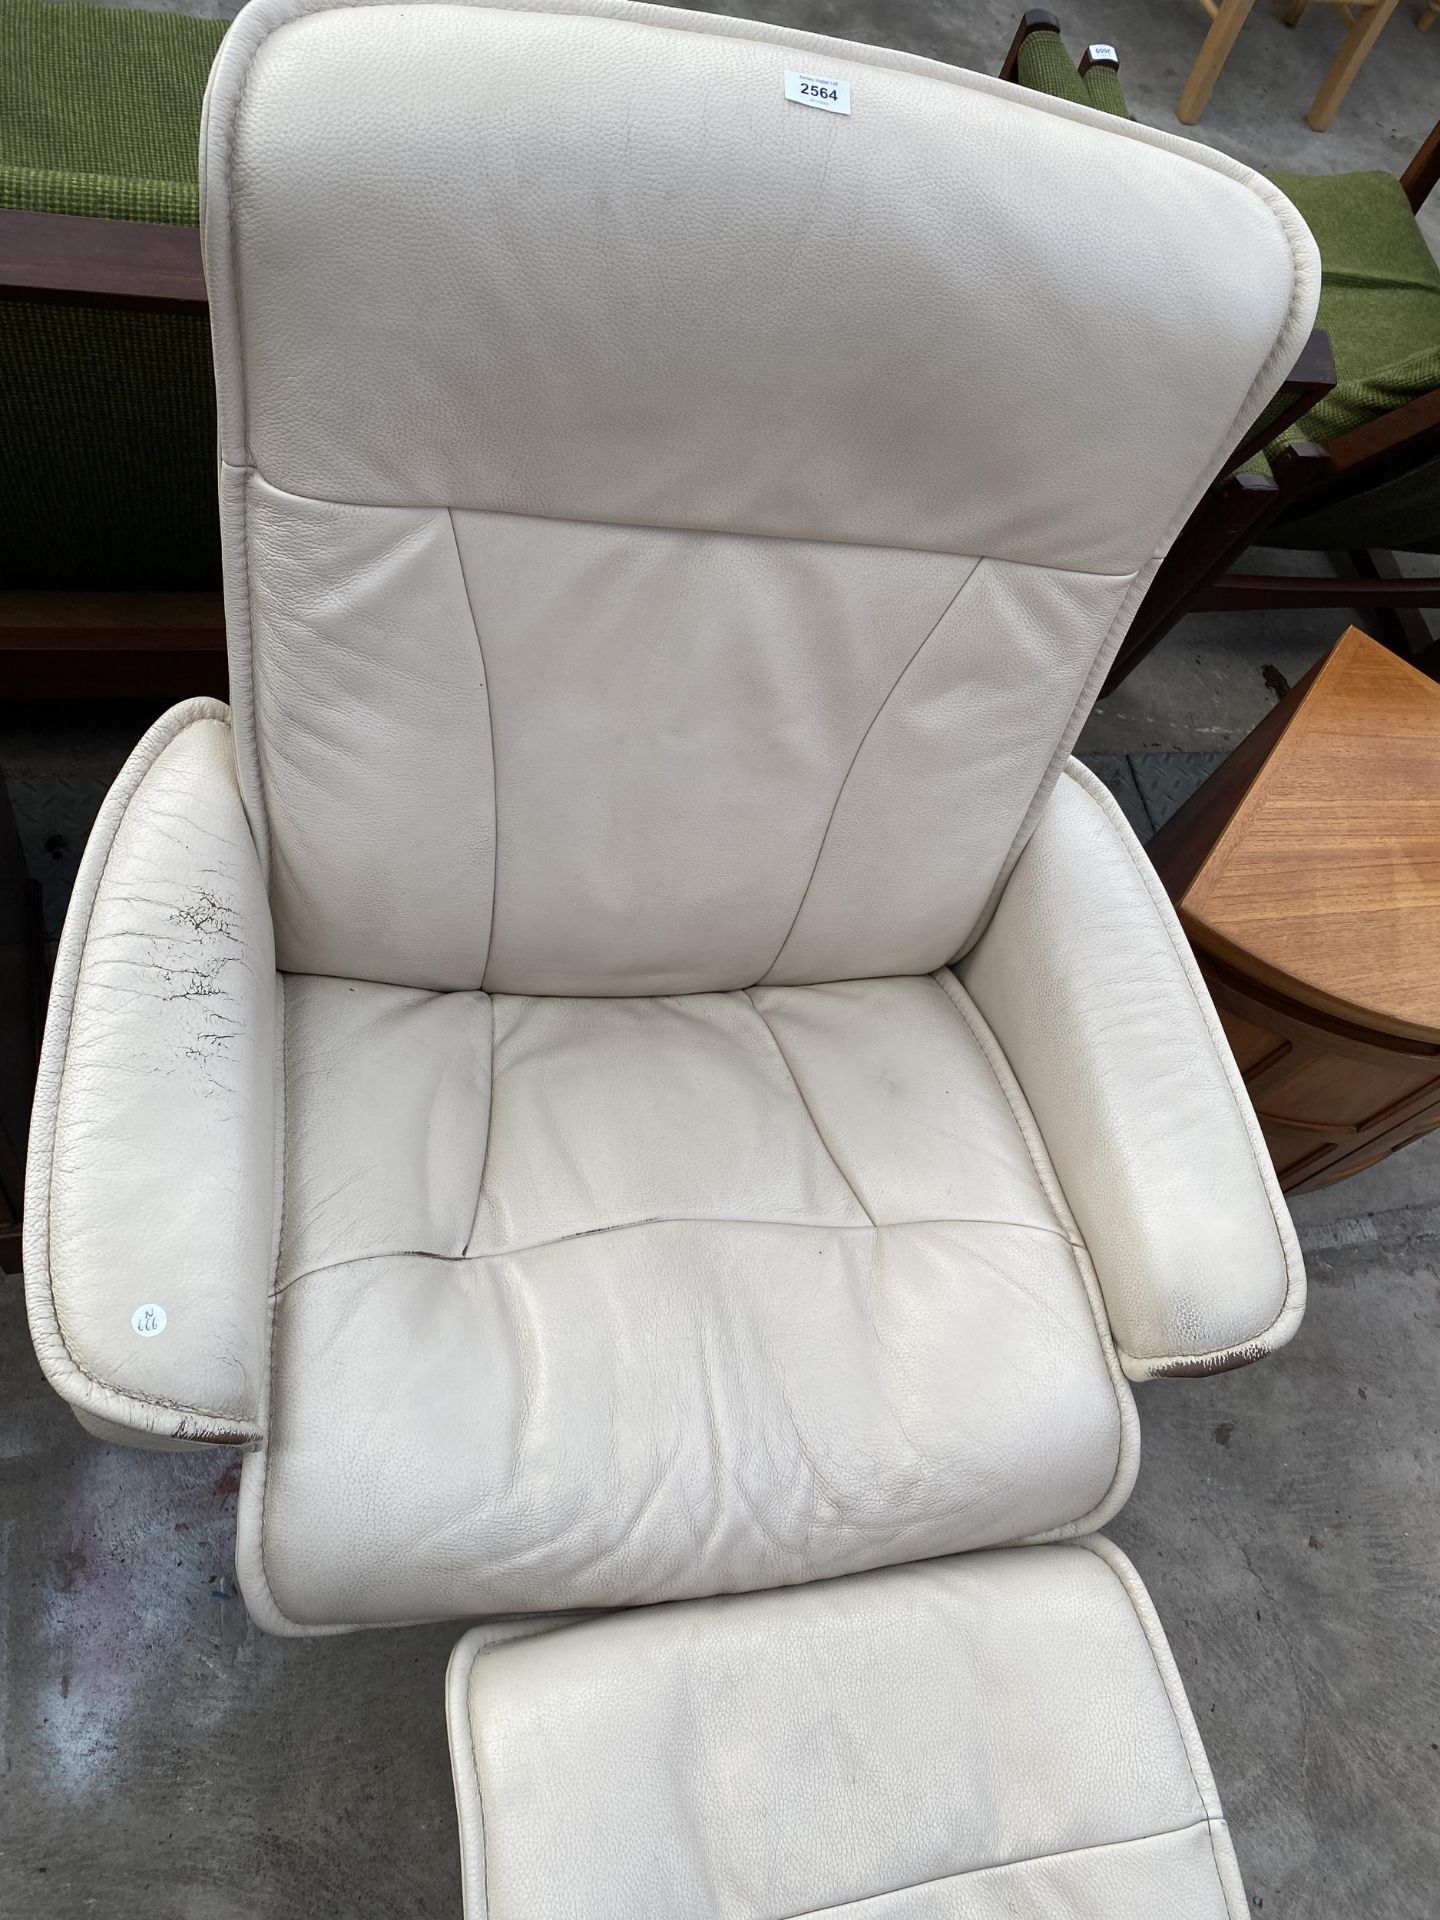 A STRESSLESS RECLINING SWIVEL CHAIR AND MATCHING STOOL - Image 3 of 3